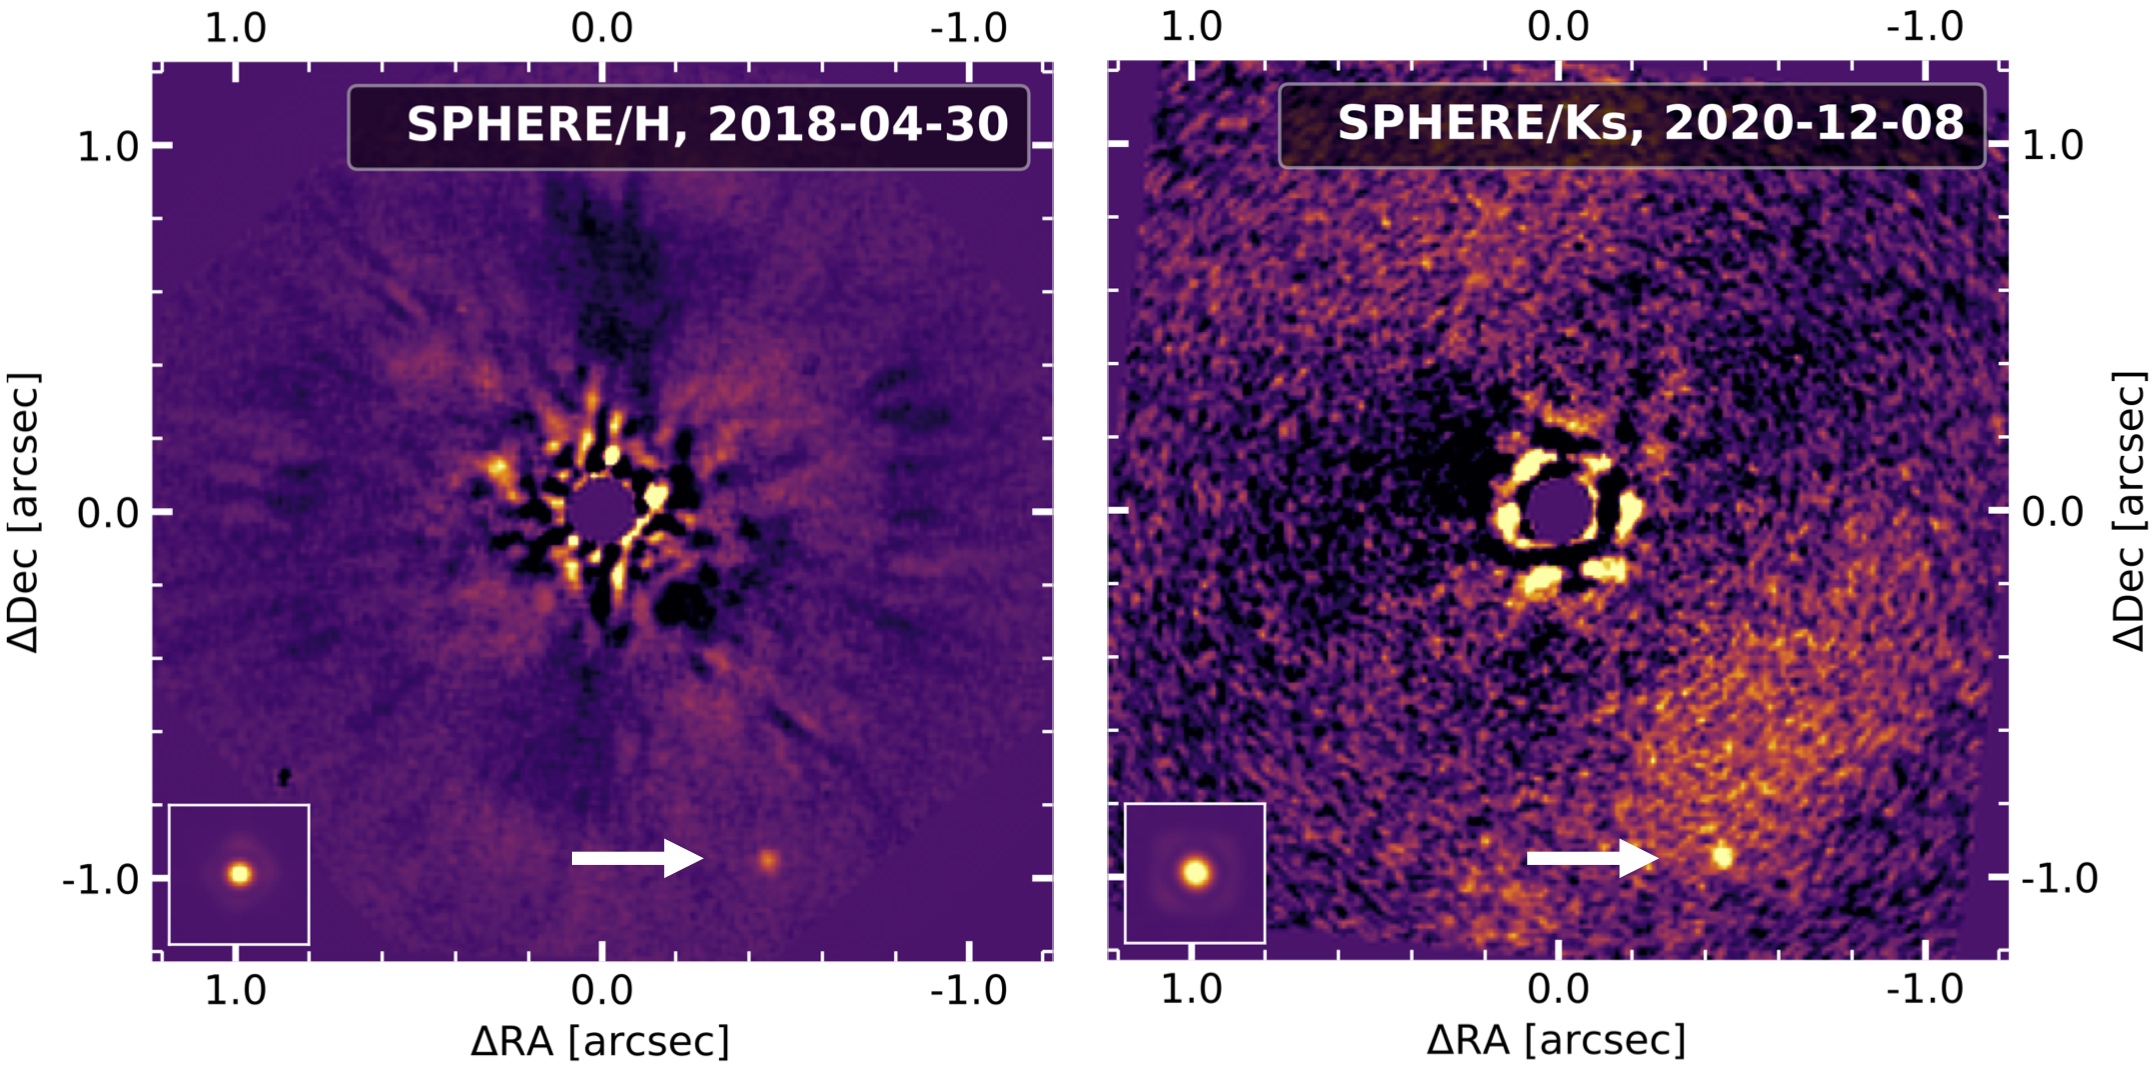 H and K band images of the exoplanet YSES 2b